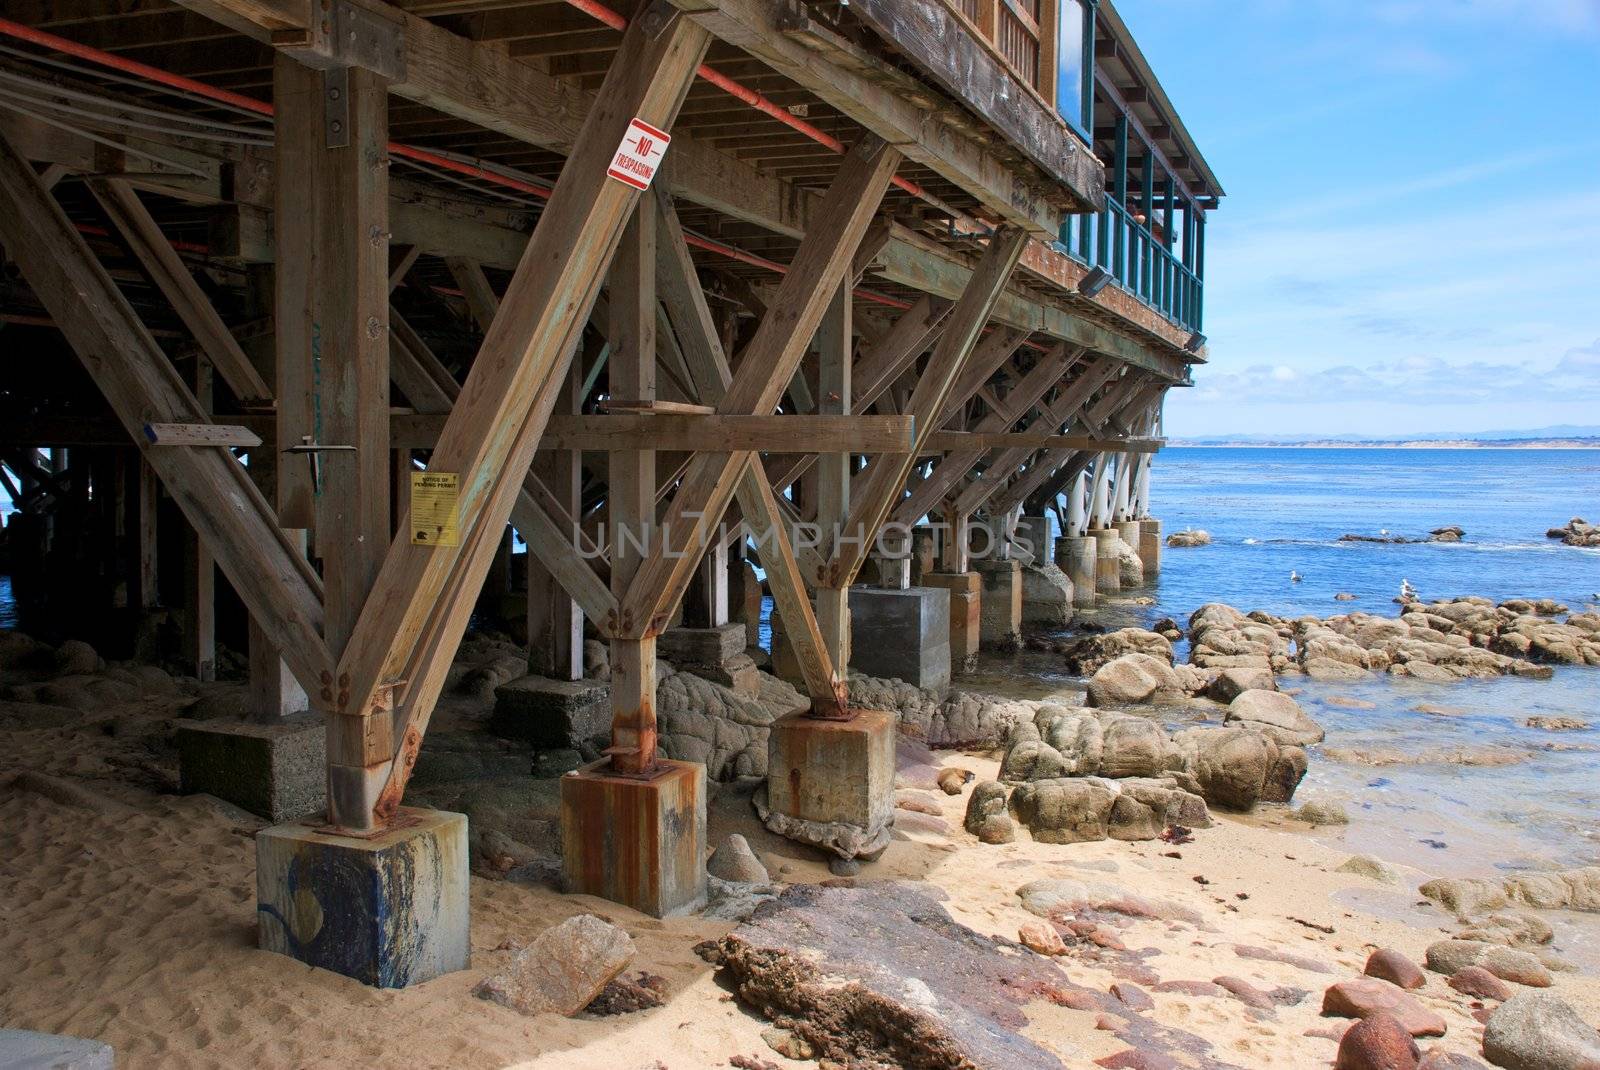 Wooden Pier and Coast in Monterey California by pixelsnap